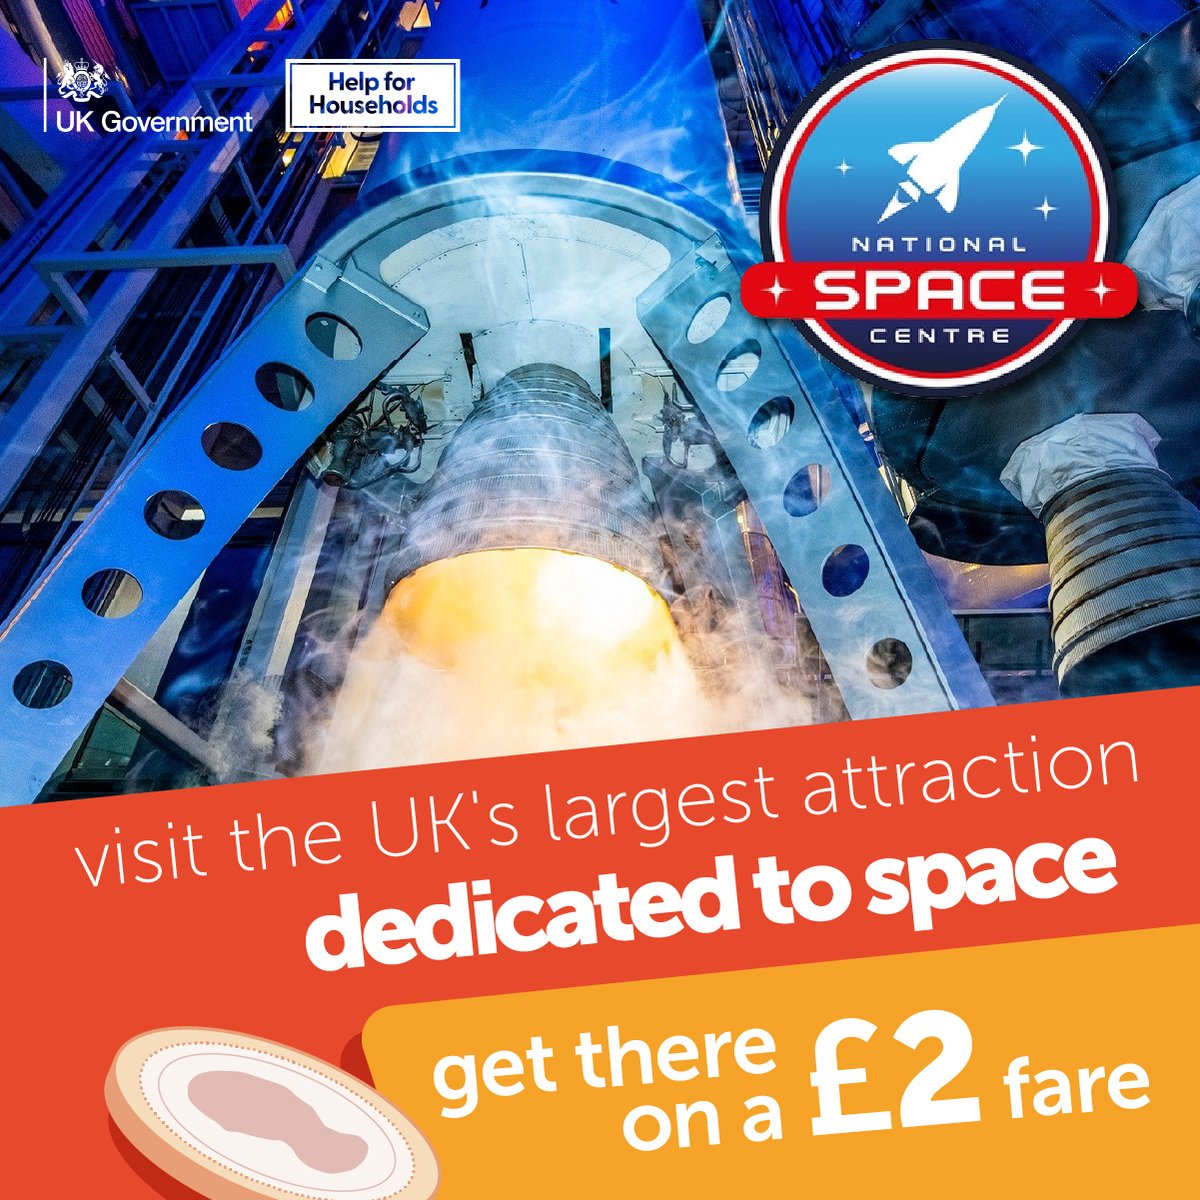 Visit the UK's largest planetarium and interactive galleries to discover the past, present, and future of space exploration 🚀 Let us take you there on the £2 fare, our skylink bus runs every 20 minutes along Abbey Lane 🚍